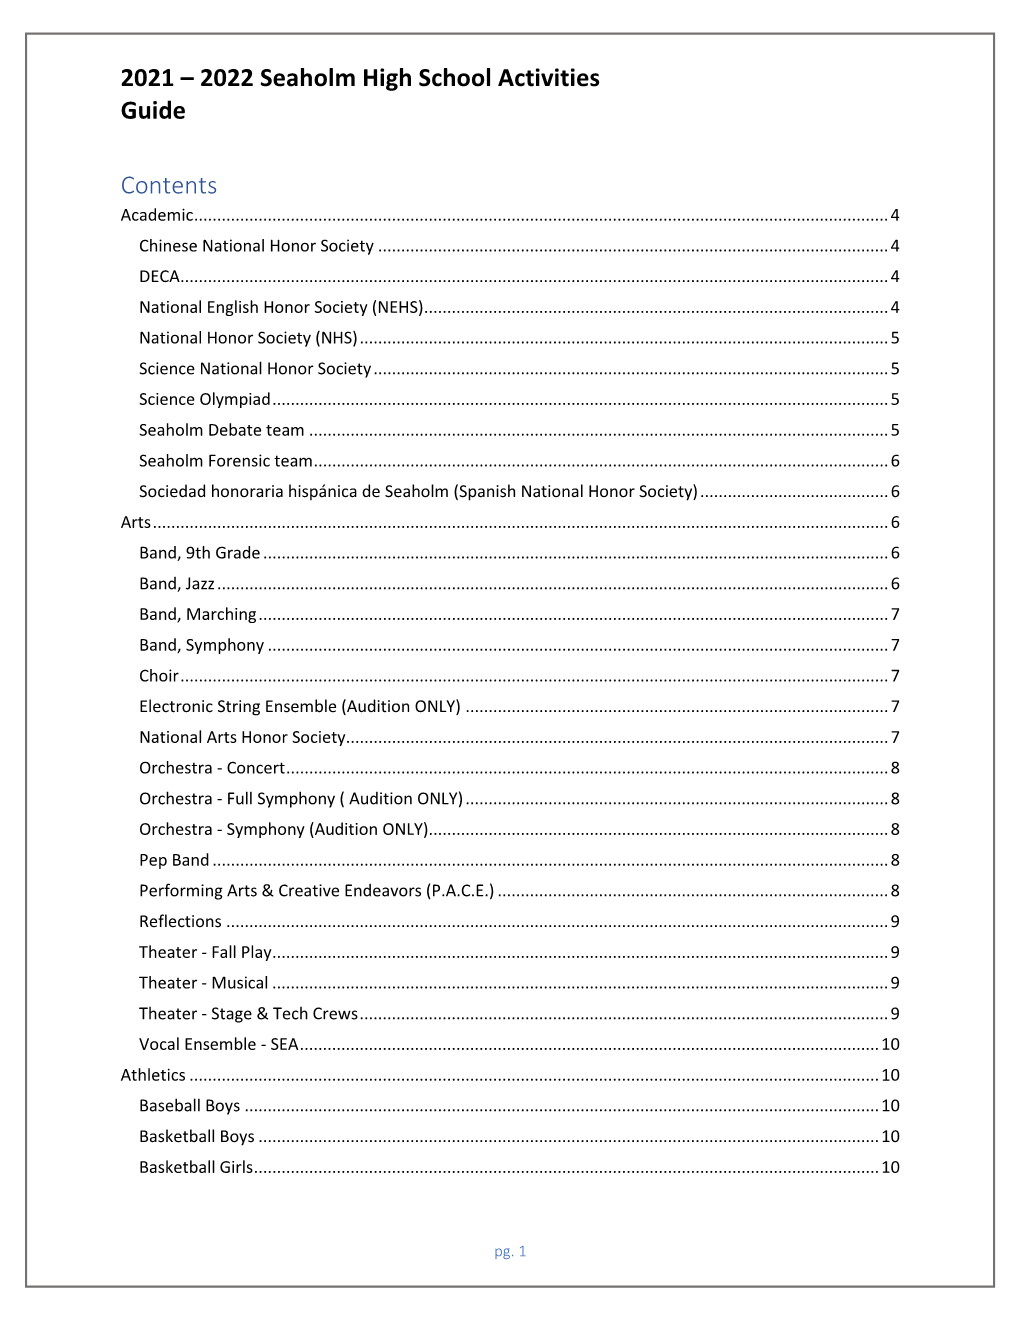 2021 – 2022 Seaholm High School Activities Guide Contents